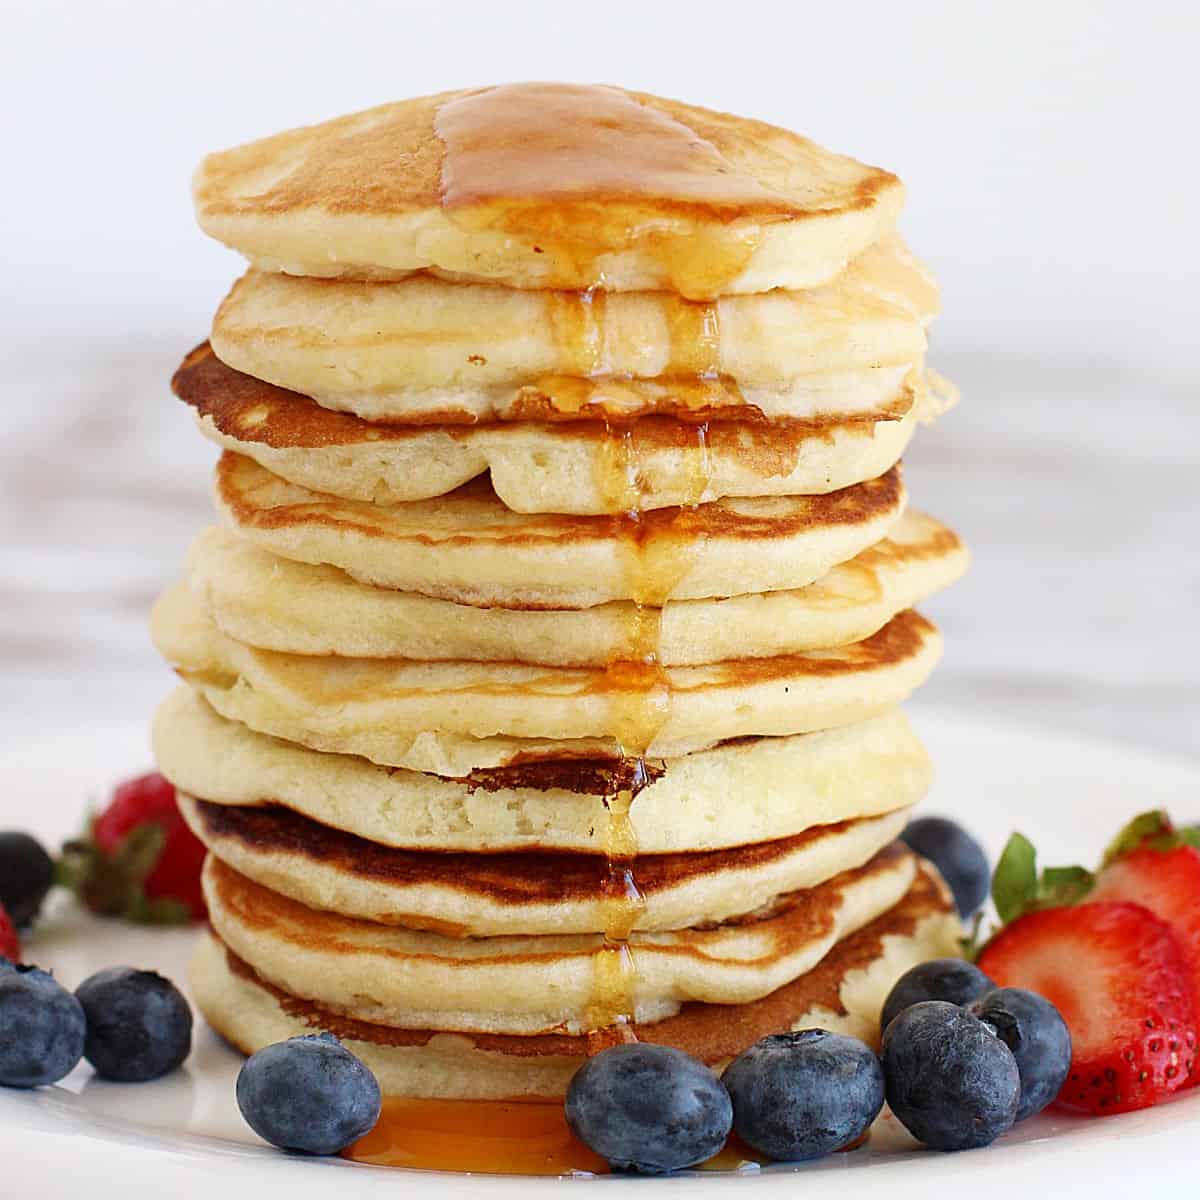 Tall stack of buttermilk pancakes with maple syrup and berries around. White background.